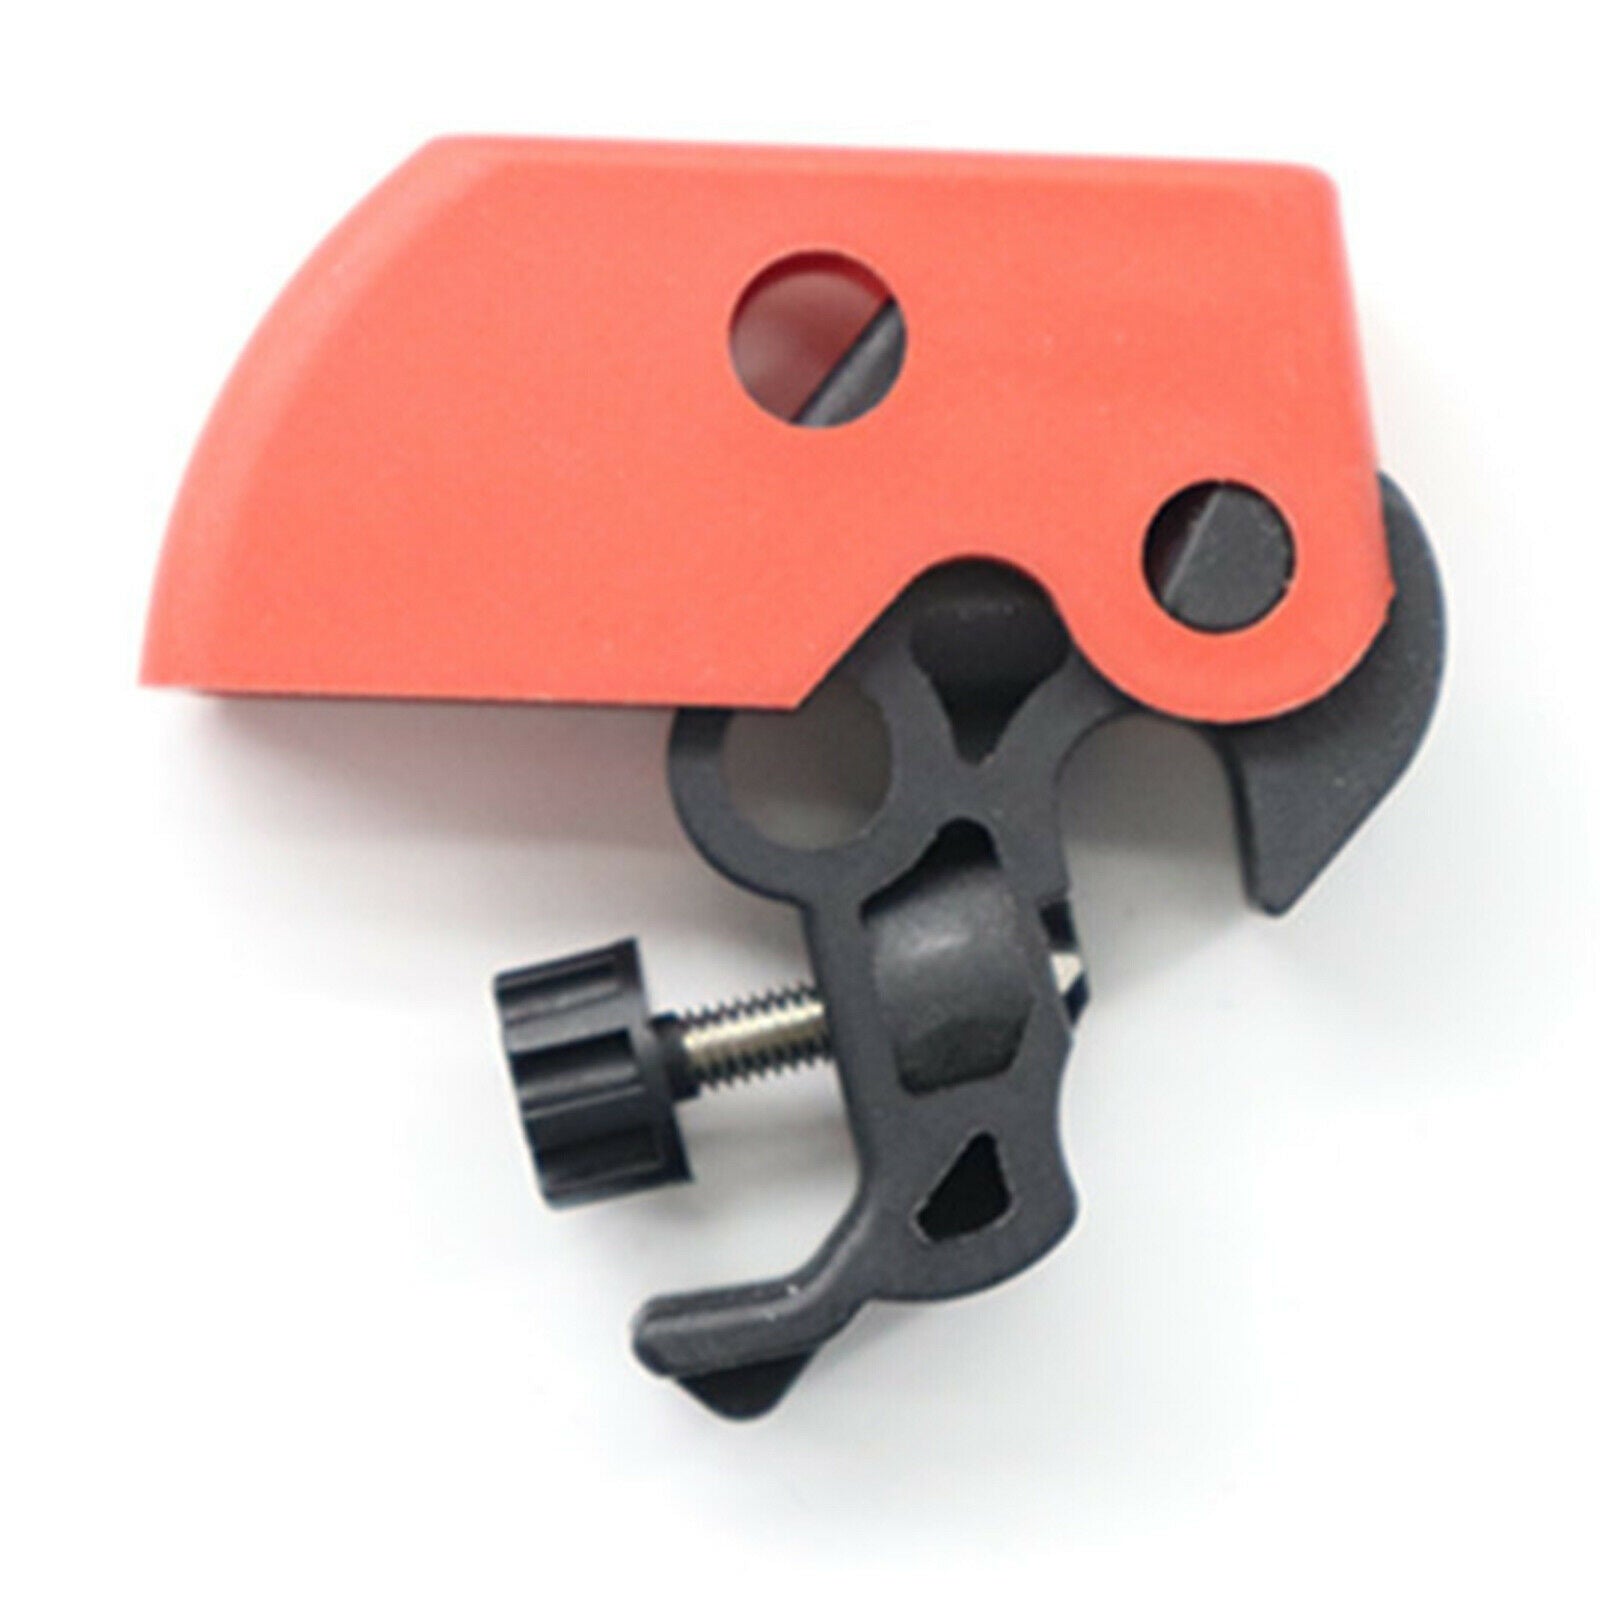 Universal Nylon Circuit Breaker Lockout Lockout Device Screw Safety Red